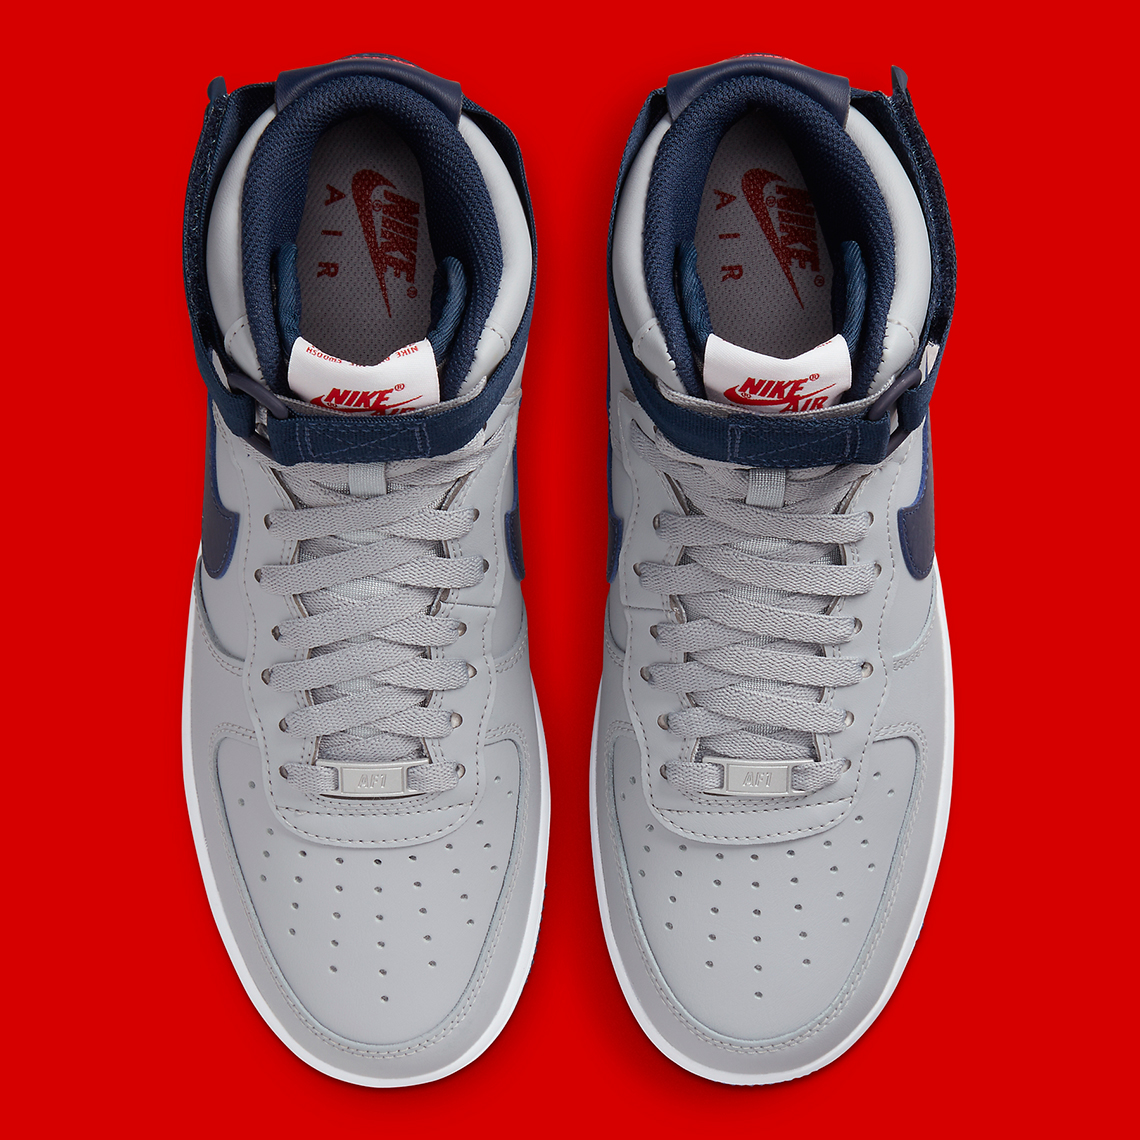 Nike Air Force 1 High Grey Navy Red Dz7338 001 6